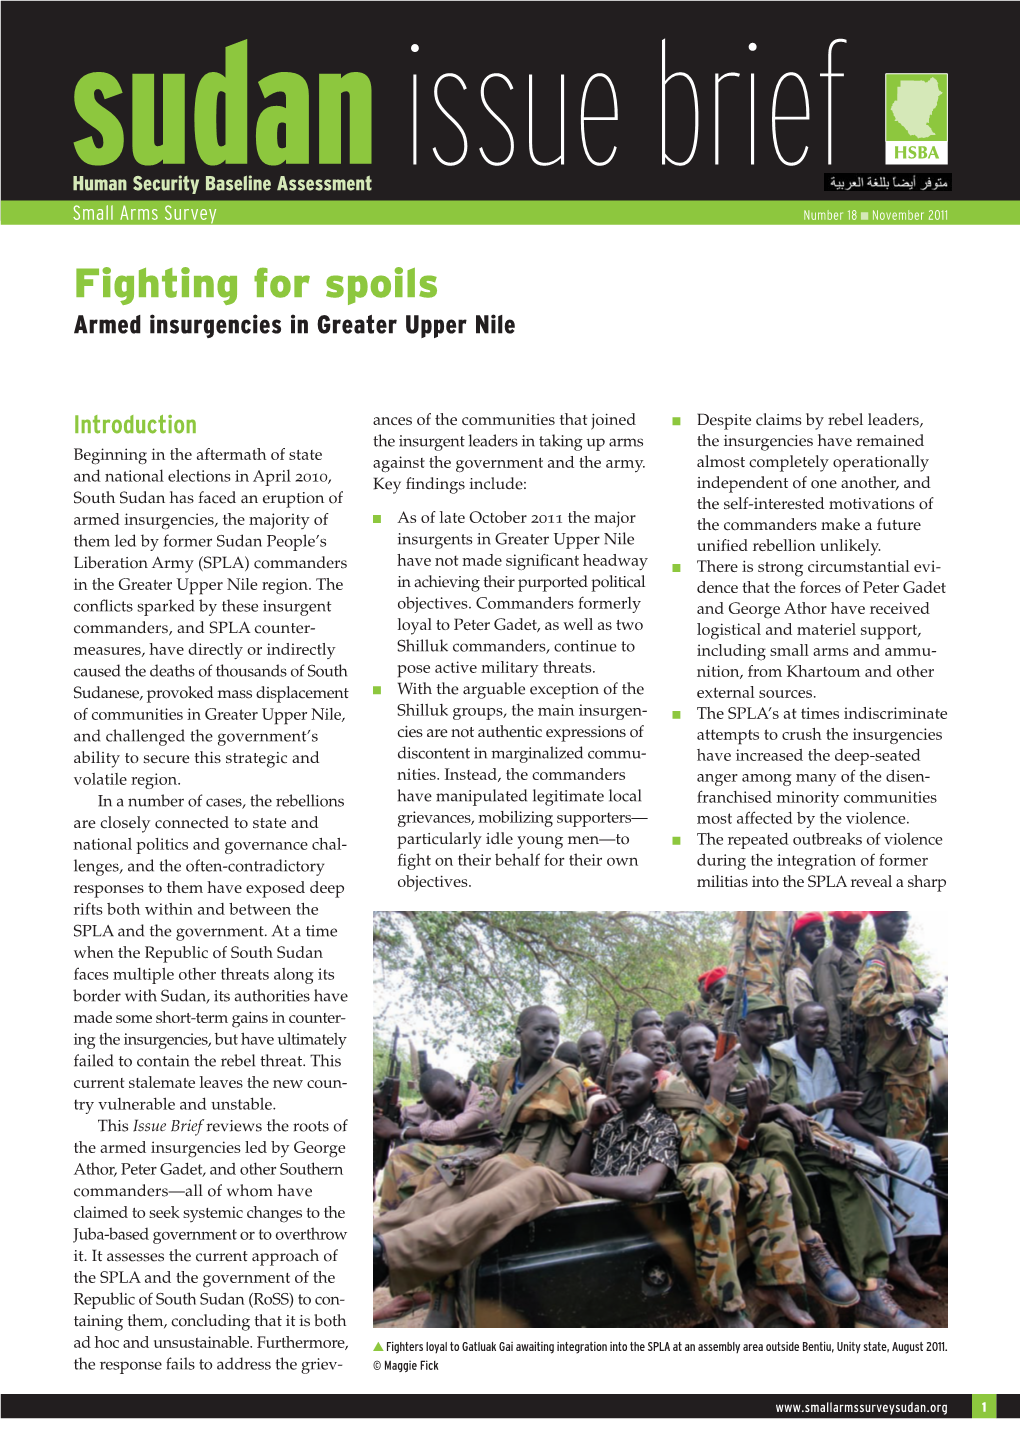 Fighting for Spoils: Armed Insurgencies in Greater Upper Nile